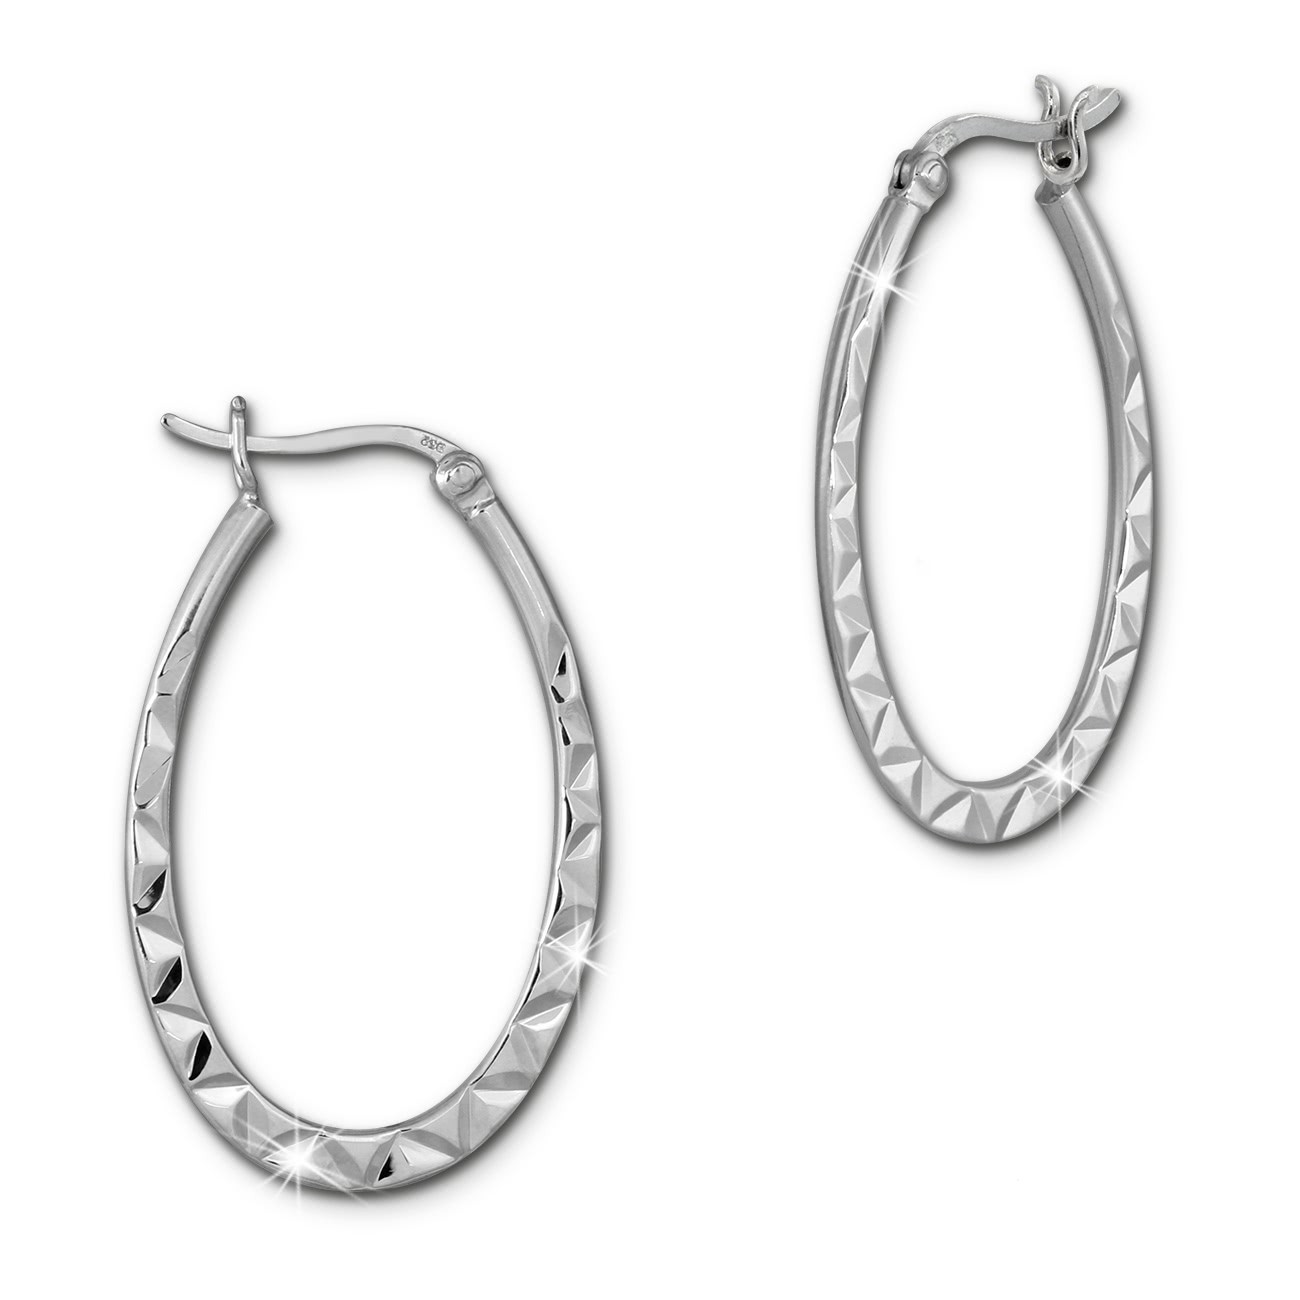 SilberDream Creole oval 23mm x 35mm Ohrring 925 Sterling Silber SDO464J